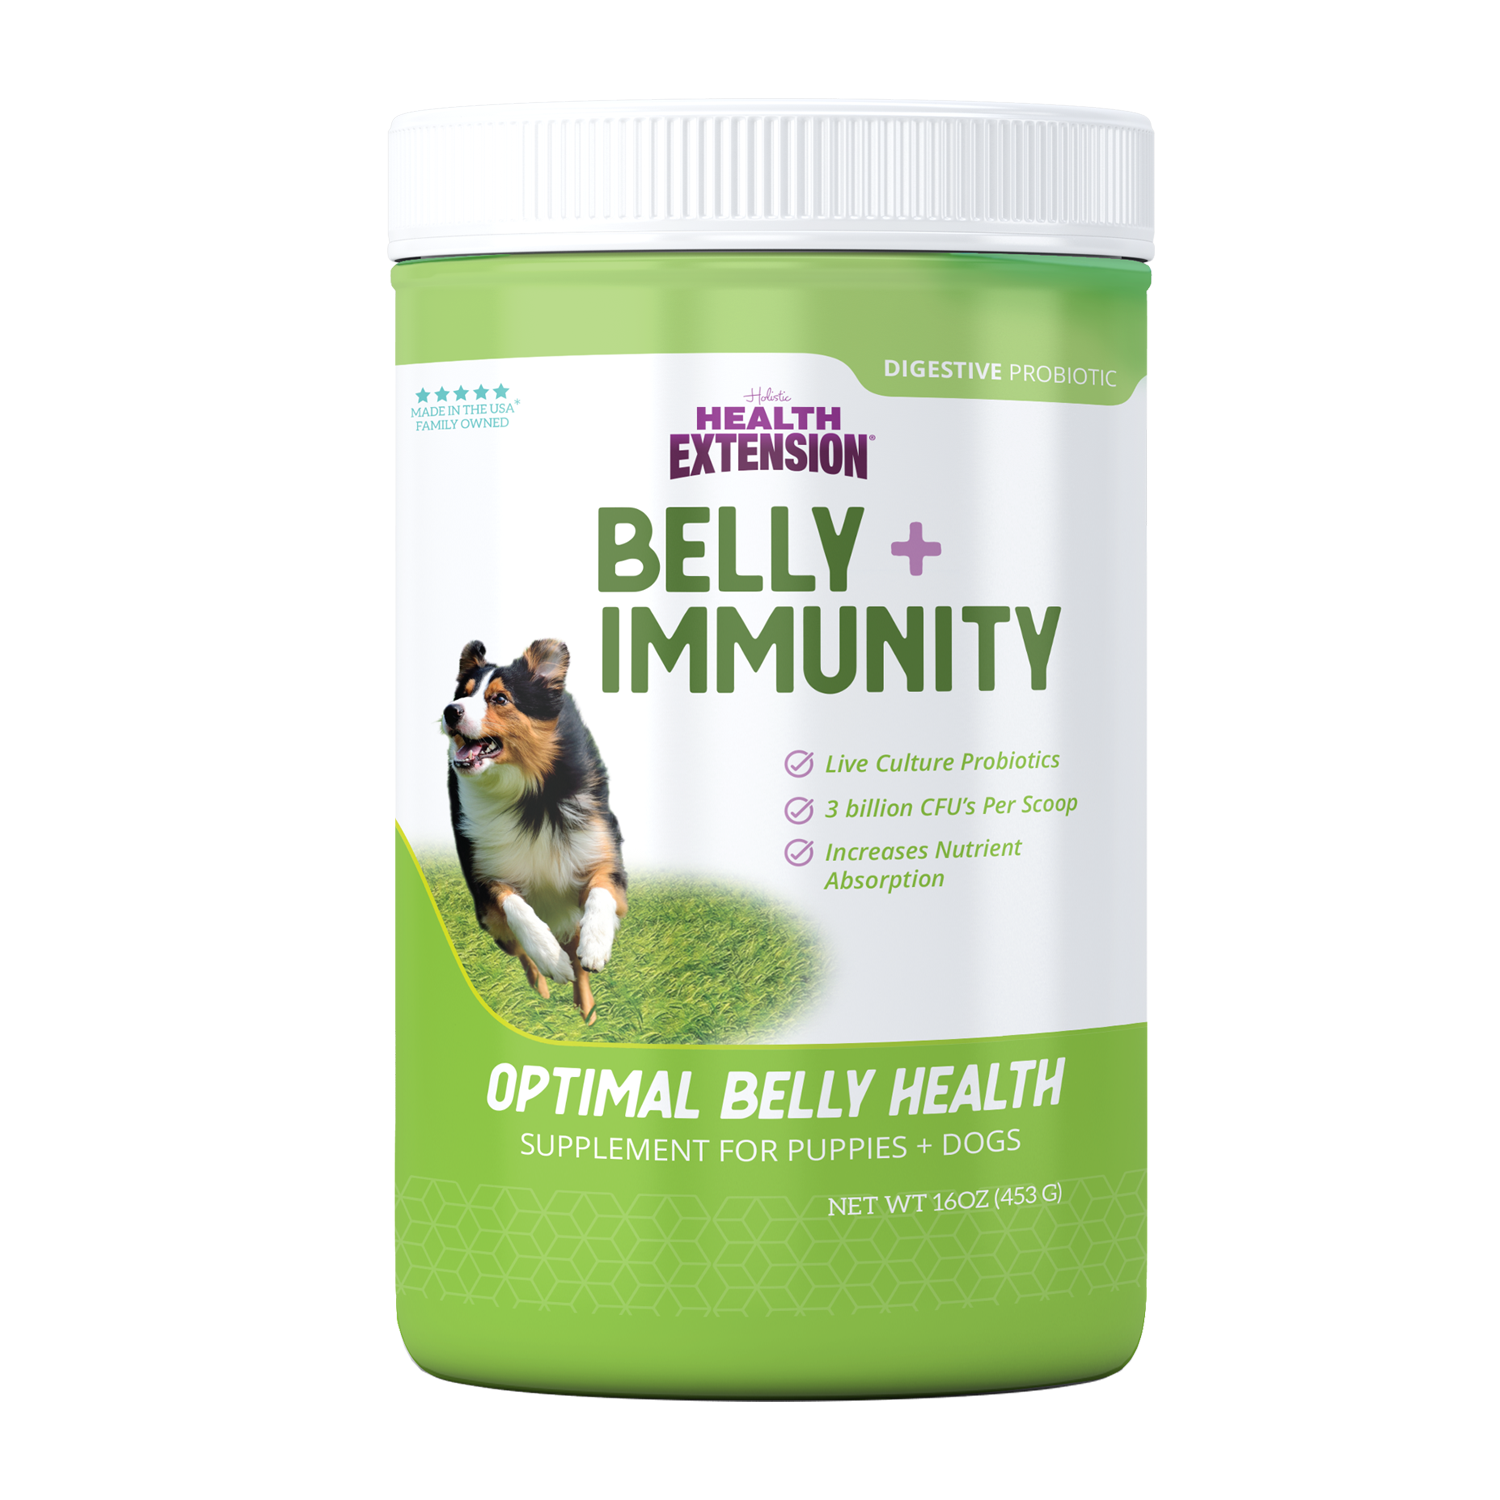 BELLY + IMMUNITY Digestive Probiotic Supplement